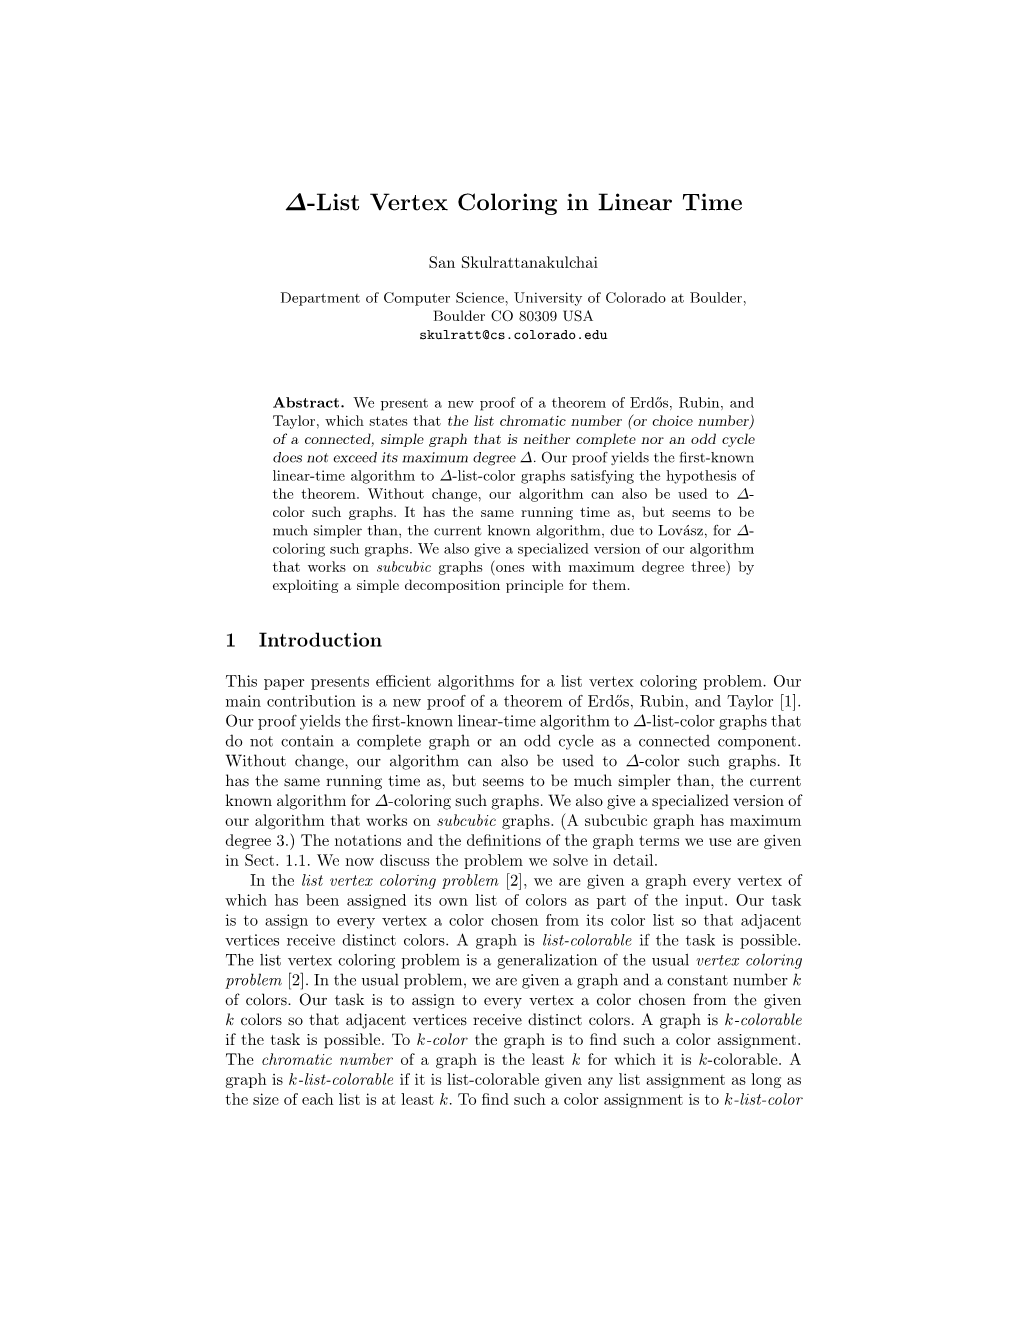 ∆-List Vertex Coloring in Linear Time